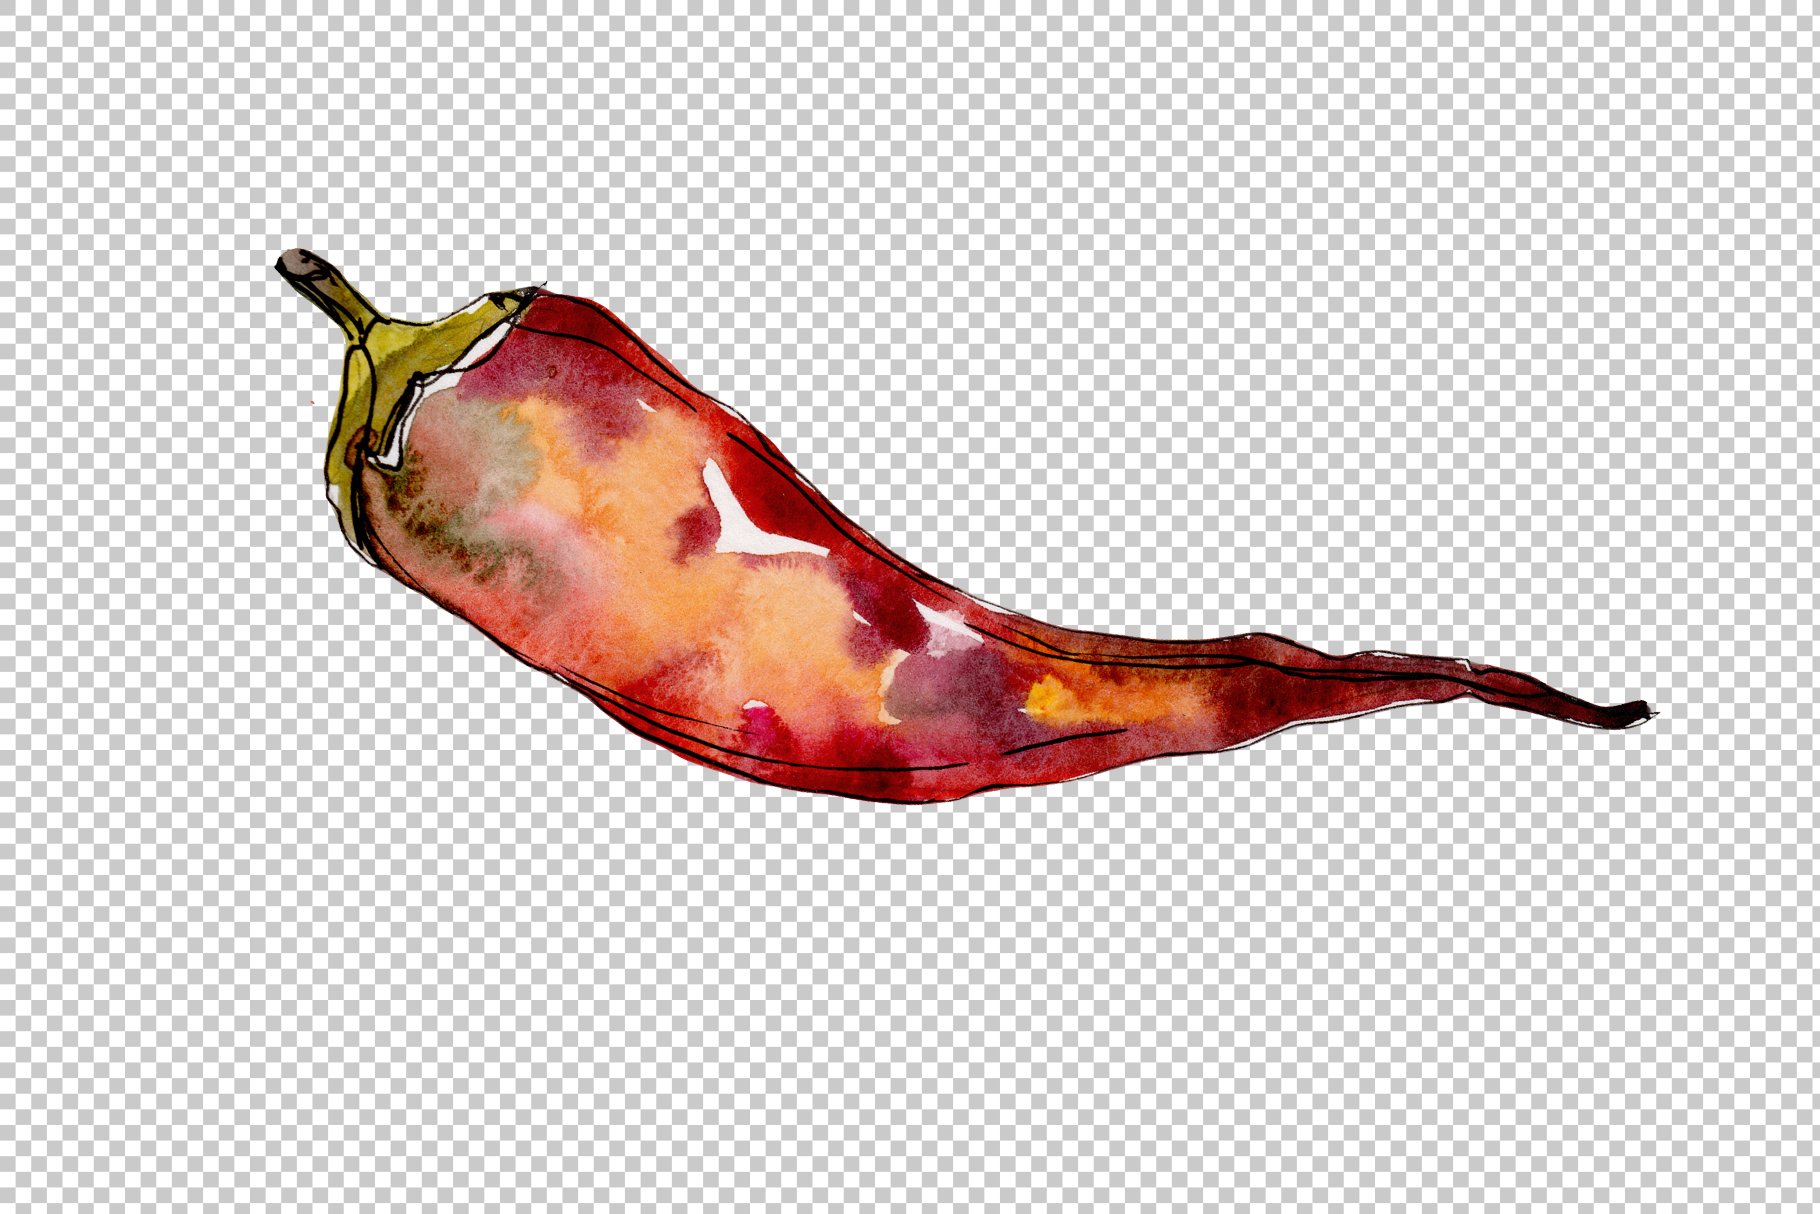 Transparent background with a chili pepper.